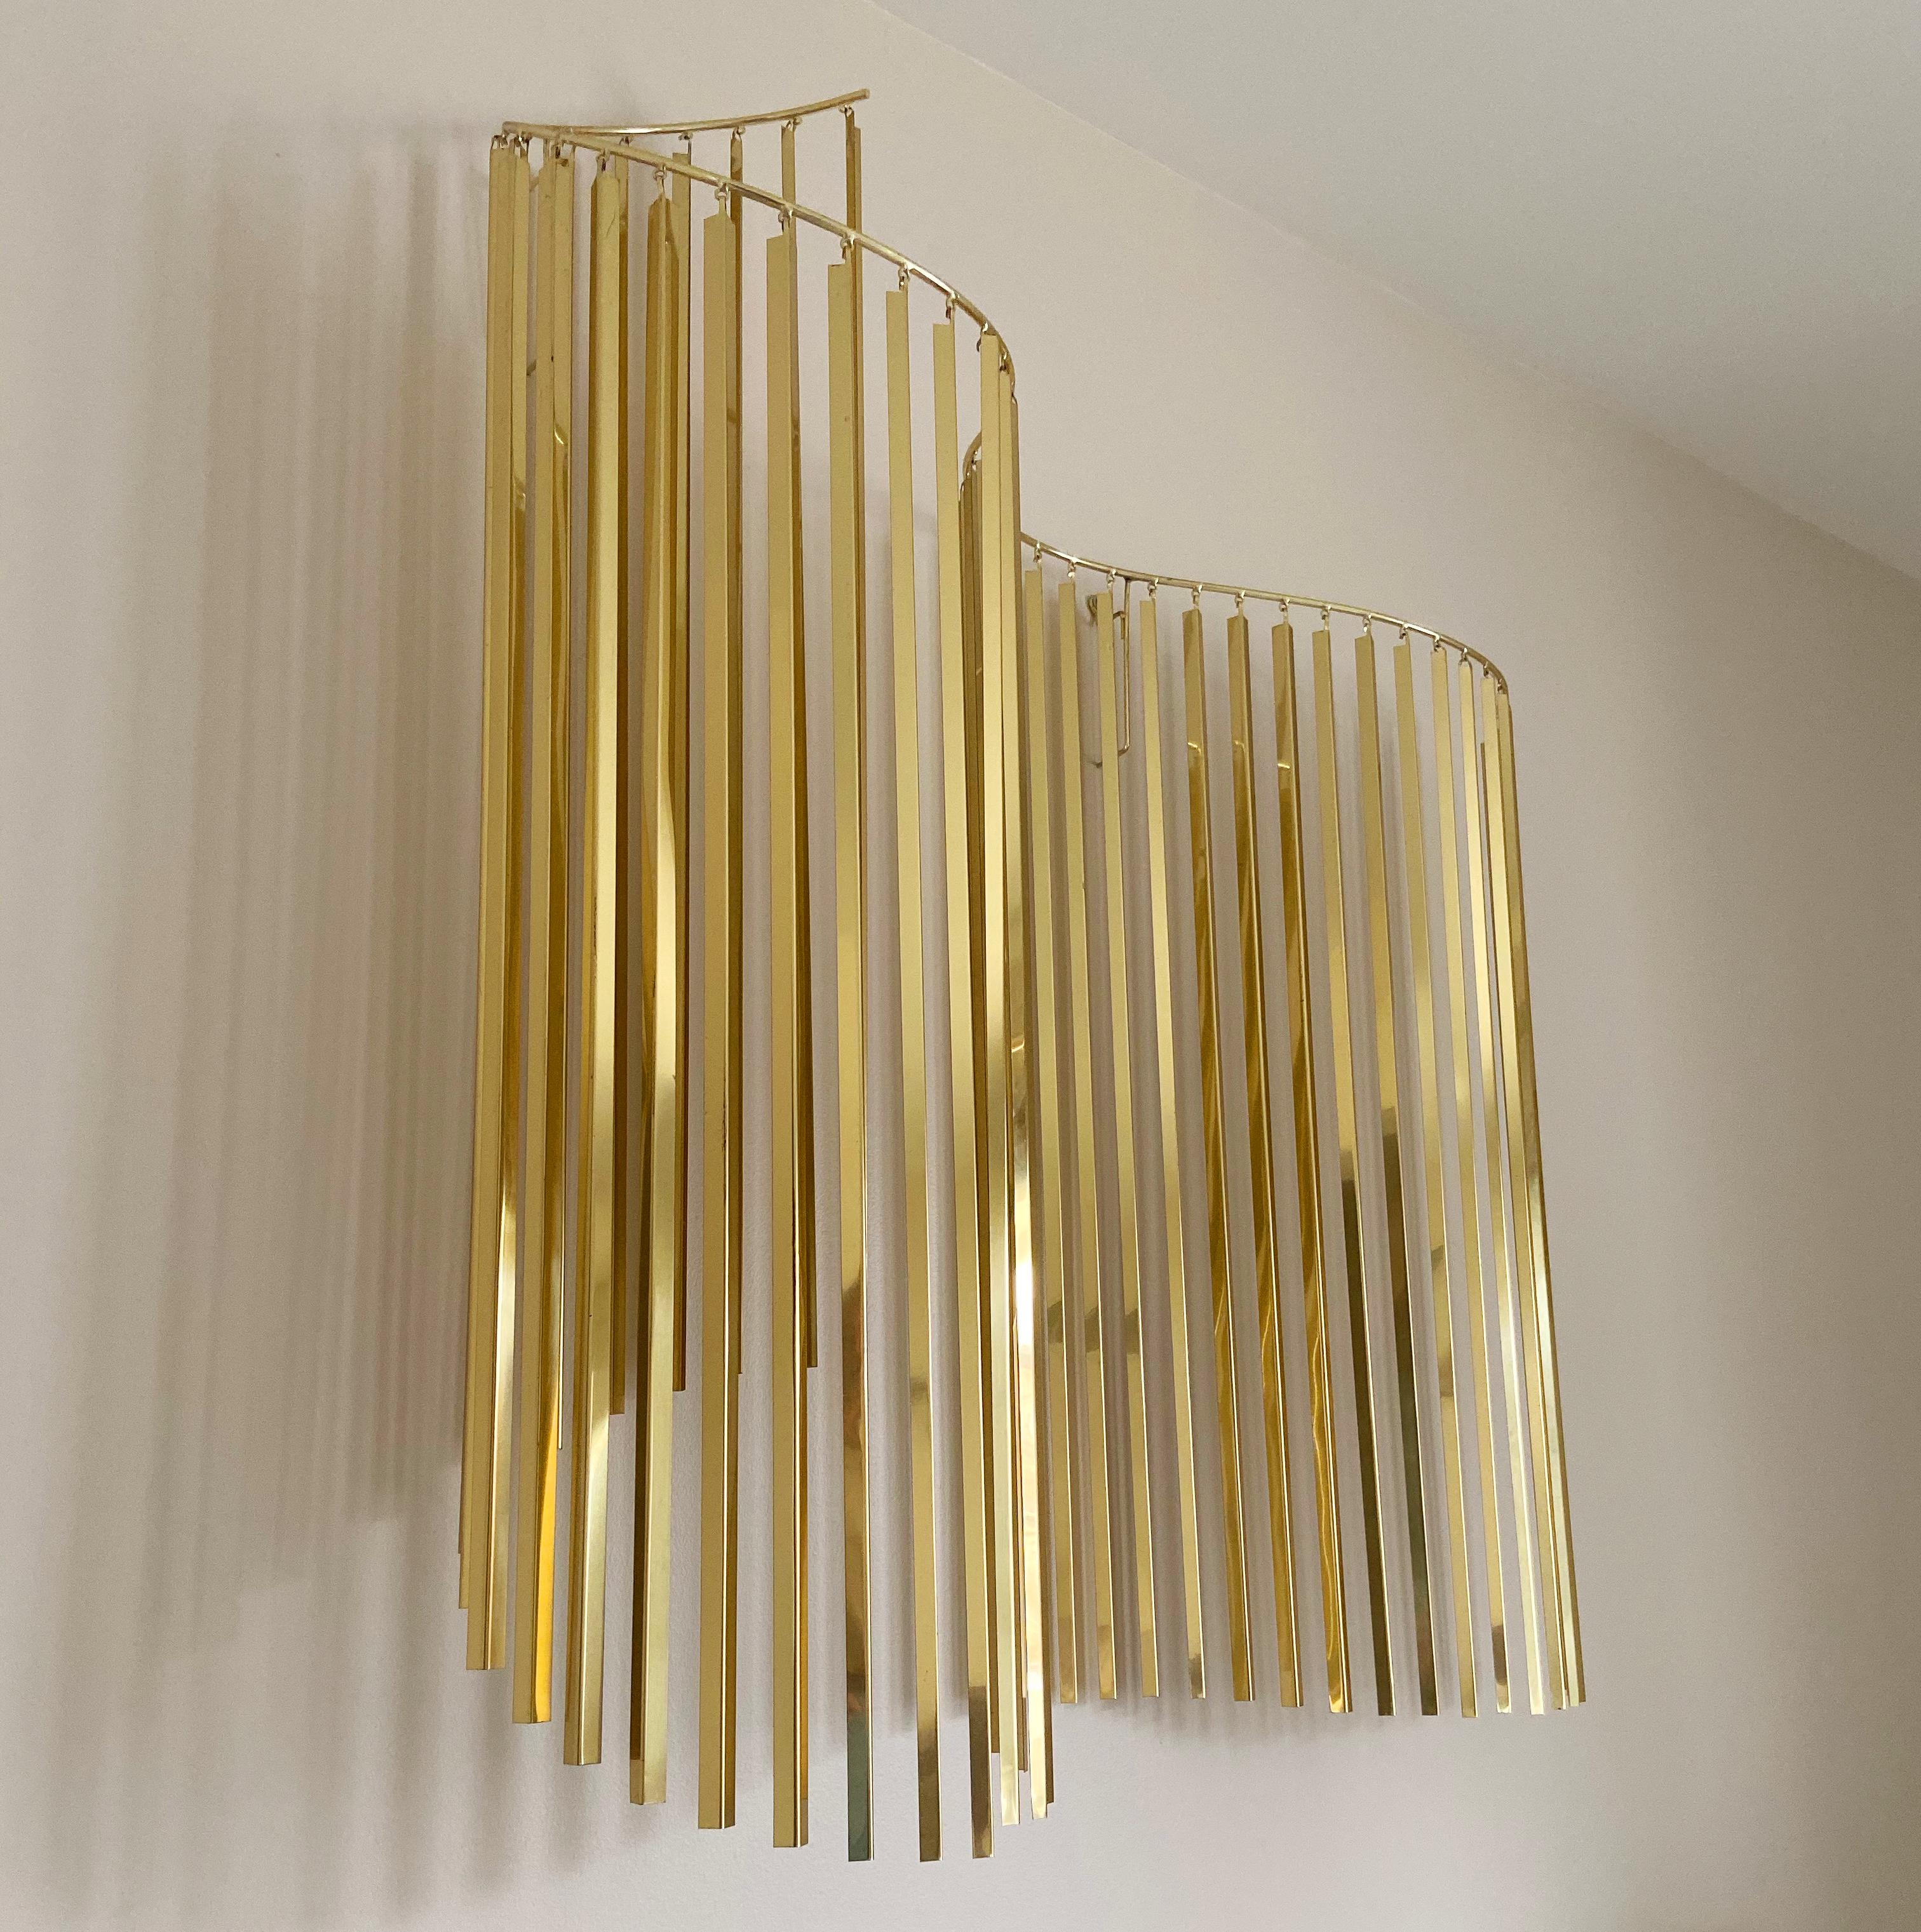 An incredibly cool piece designed by Curtis Jere and produced by Artisan House in the 1980s. It consists of a wave form frame with many brass hanging rods. Signed and dated by the artist.